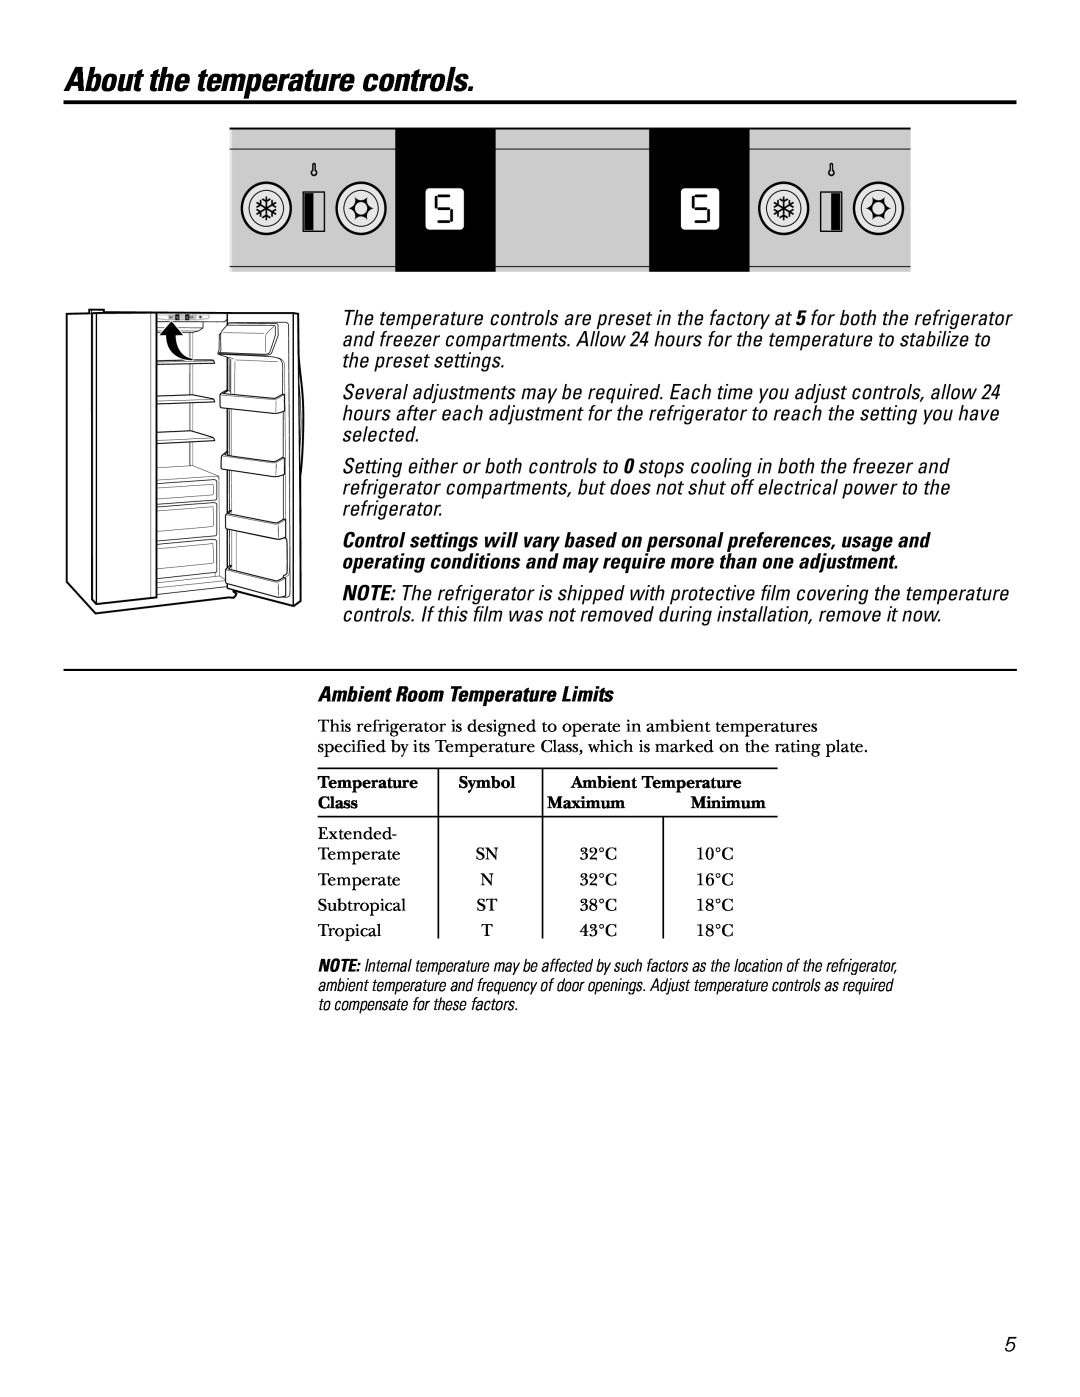 GE 200D2600P031 operating instructions About the temperature controls, Ambient Room Temperature Limits 